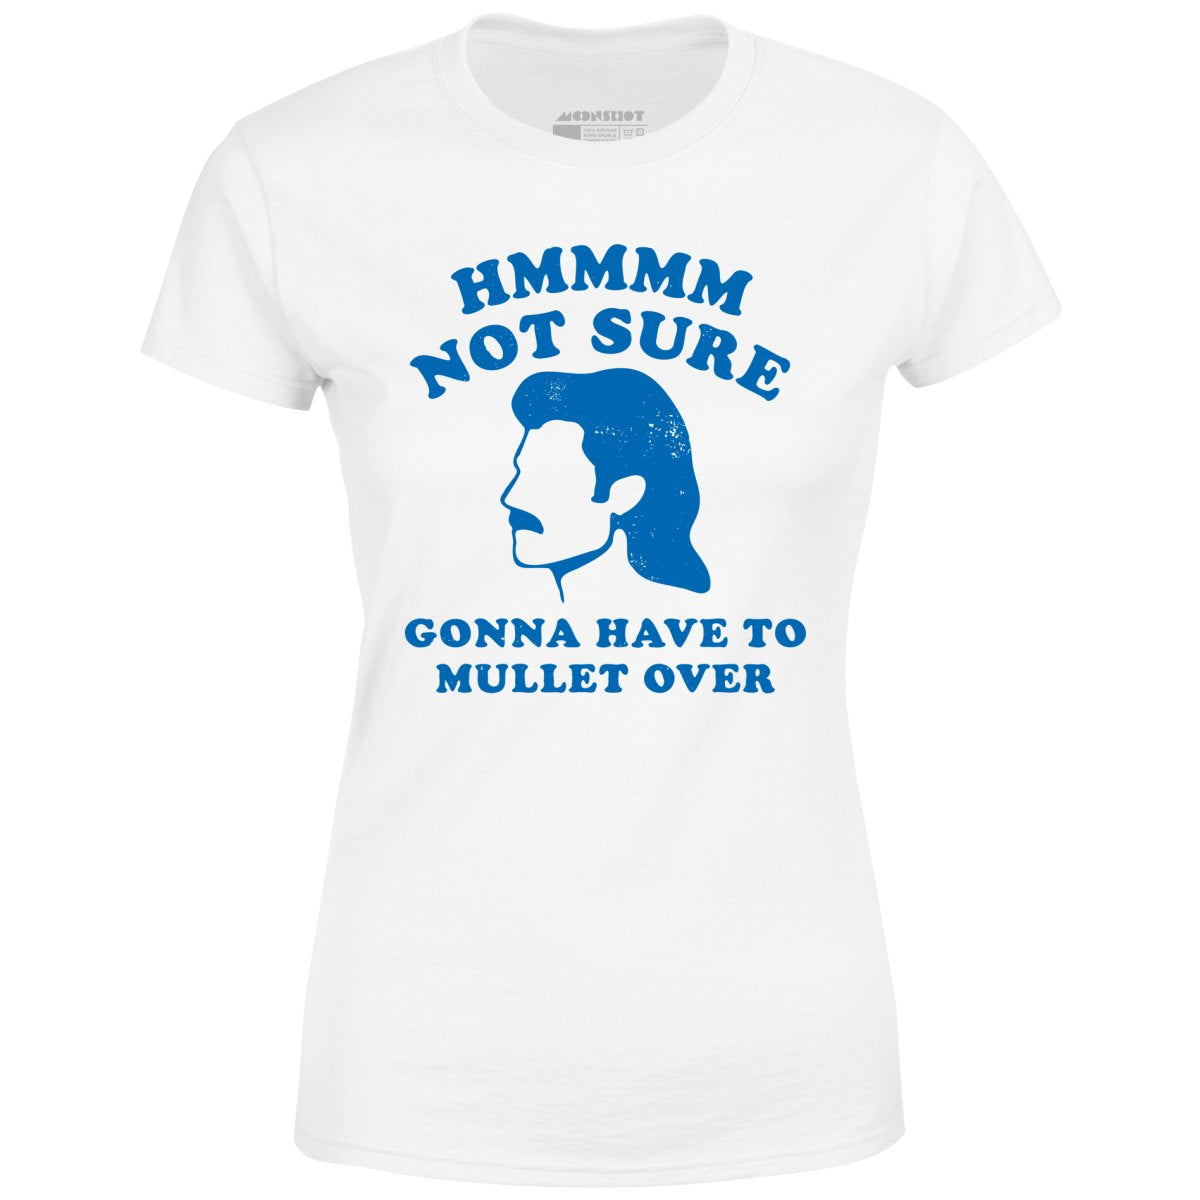 Gonna Have to Mullet Over - Women's T-Shirt